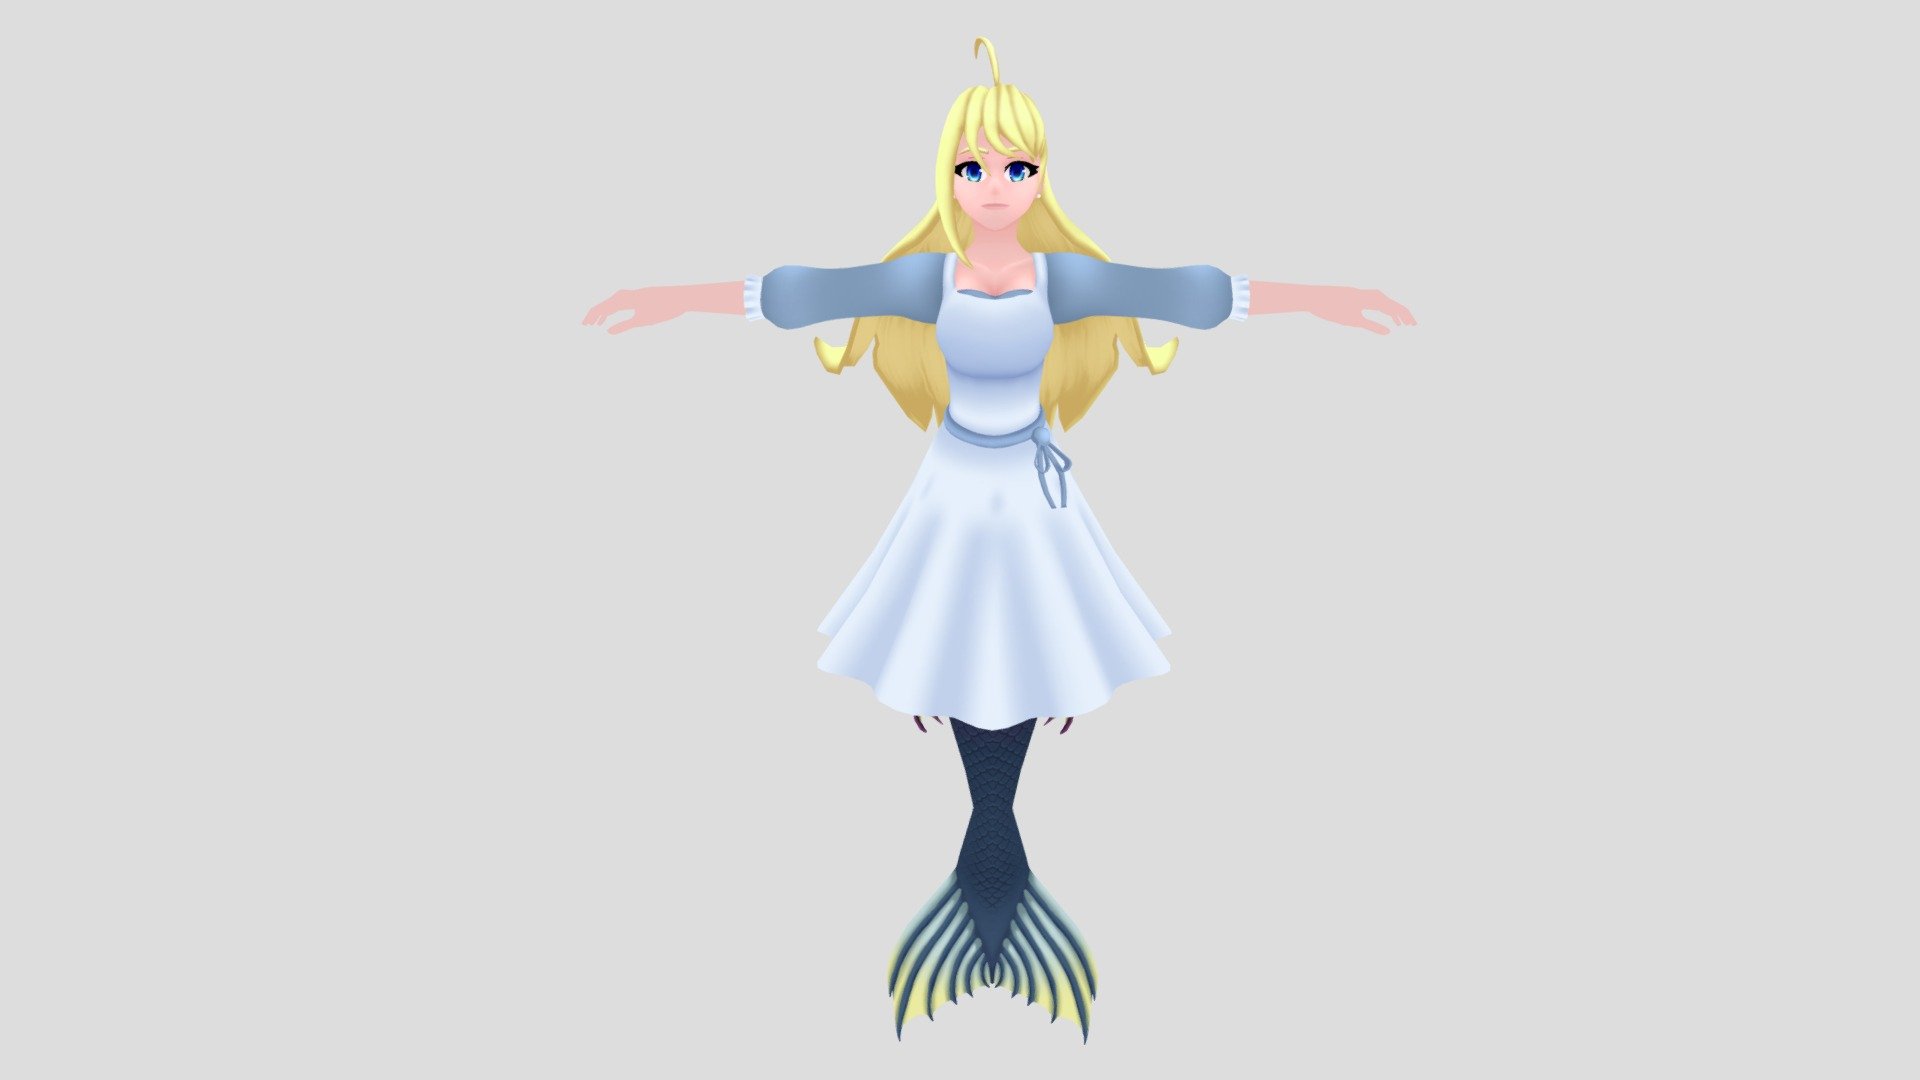 First fonctionning VRM model / vtuber model made in blender for Vseeface

Made while thinking about futur transfer in vrchat therefore topology is kept under 20k faces.

Texture are NOT OPTIMISED at all as this is my first time dealing with blender and it's particularities 3d model